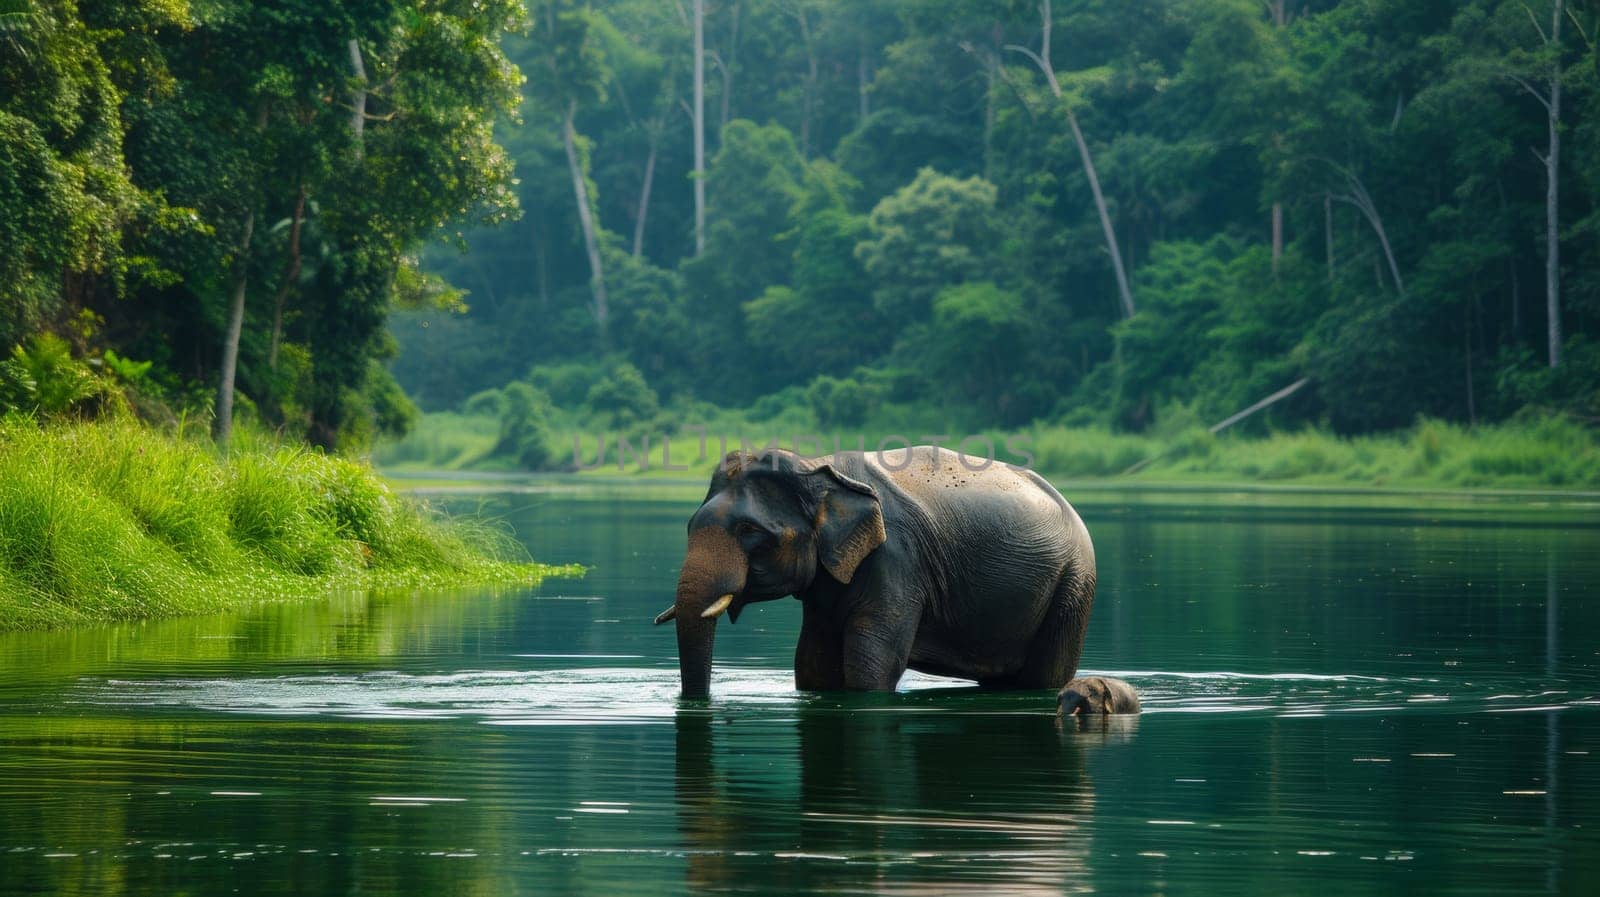 An elephant and calf in a river with lush green trees